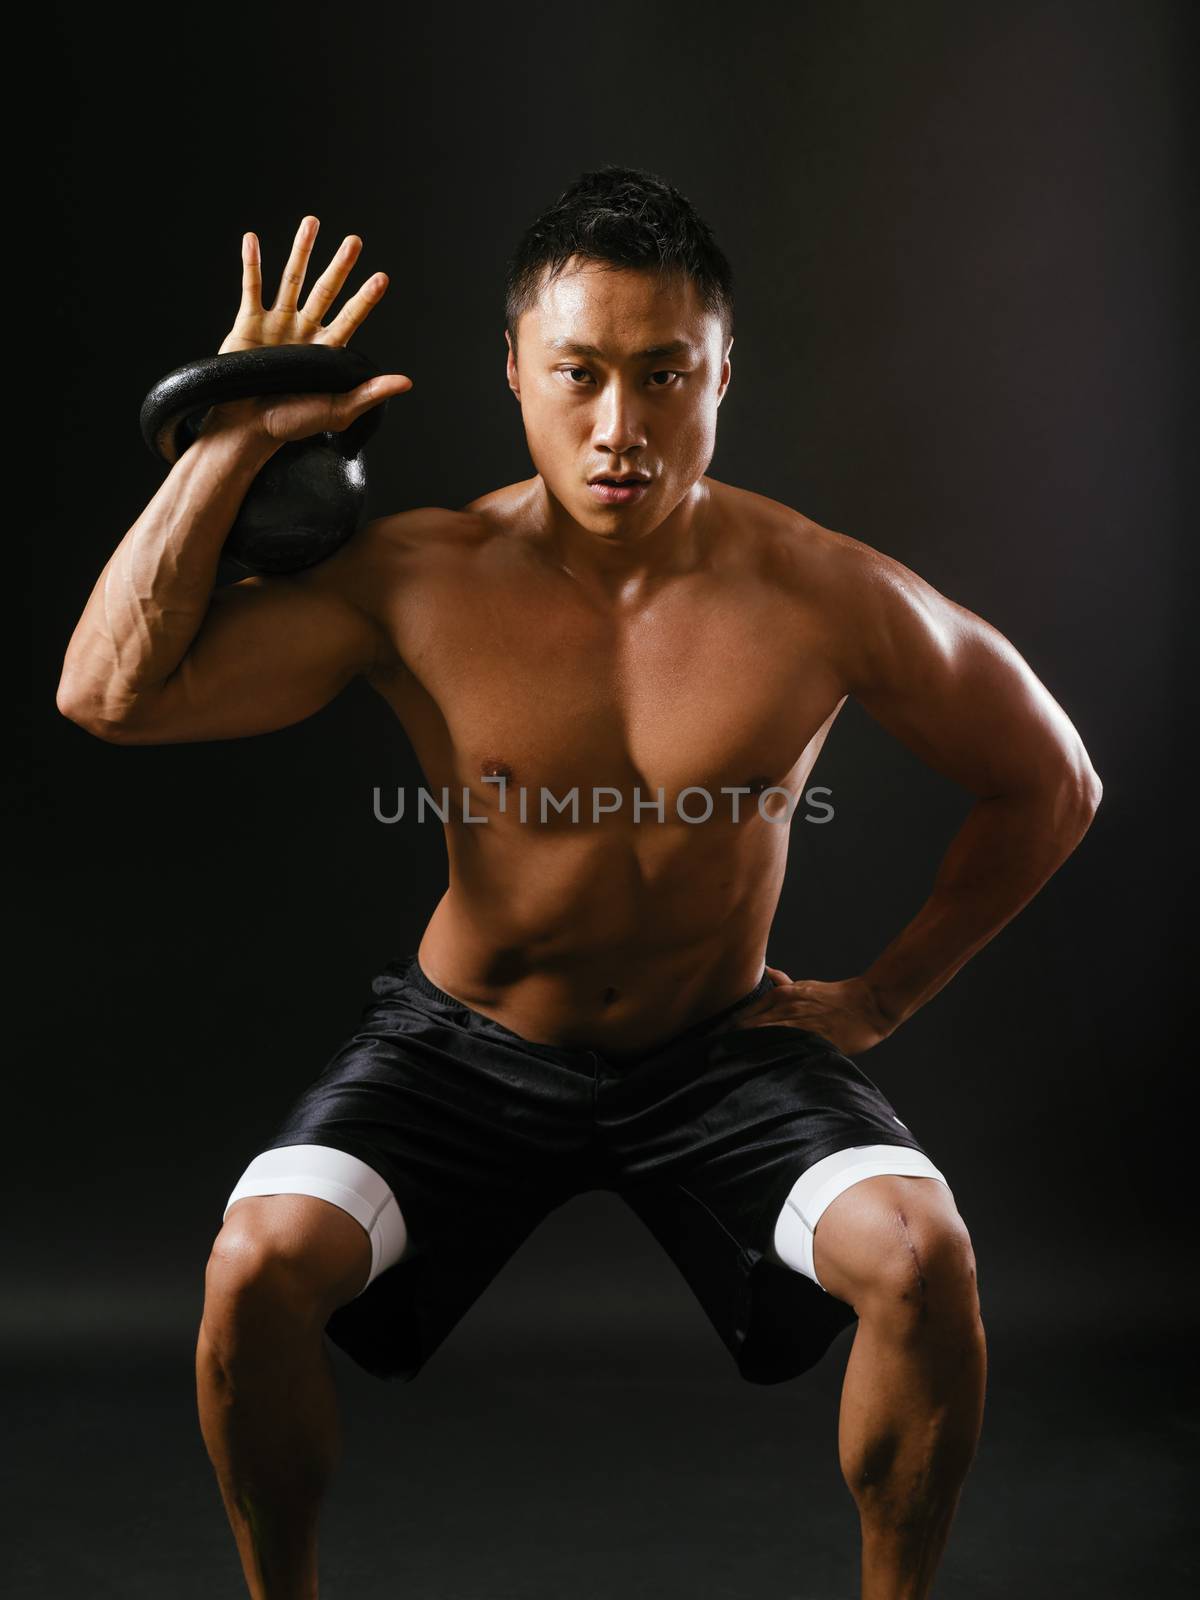 Photo of a muscular Asian man doing squats while holding a kettlebell.
